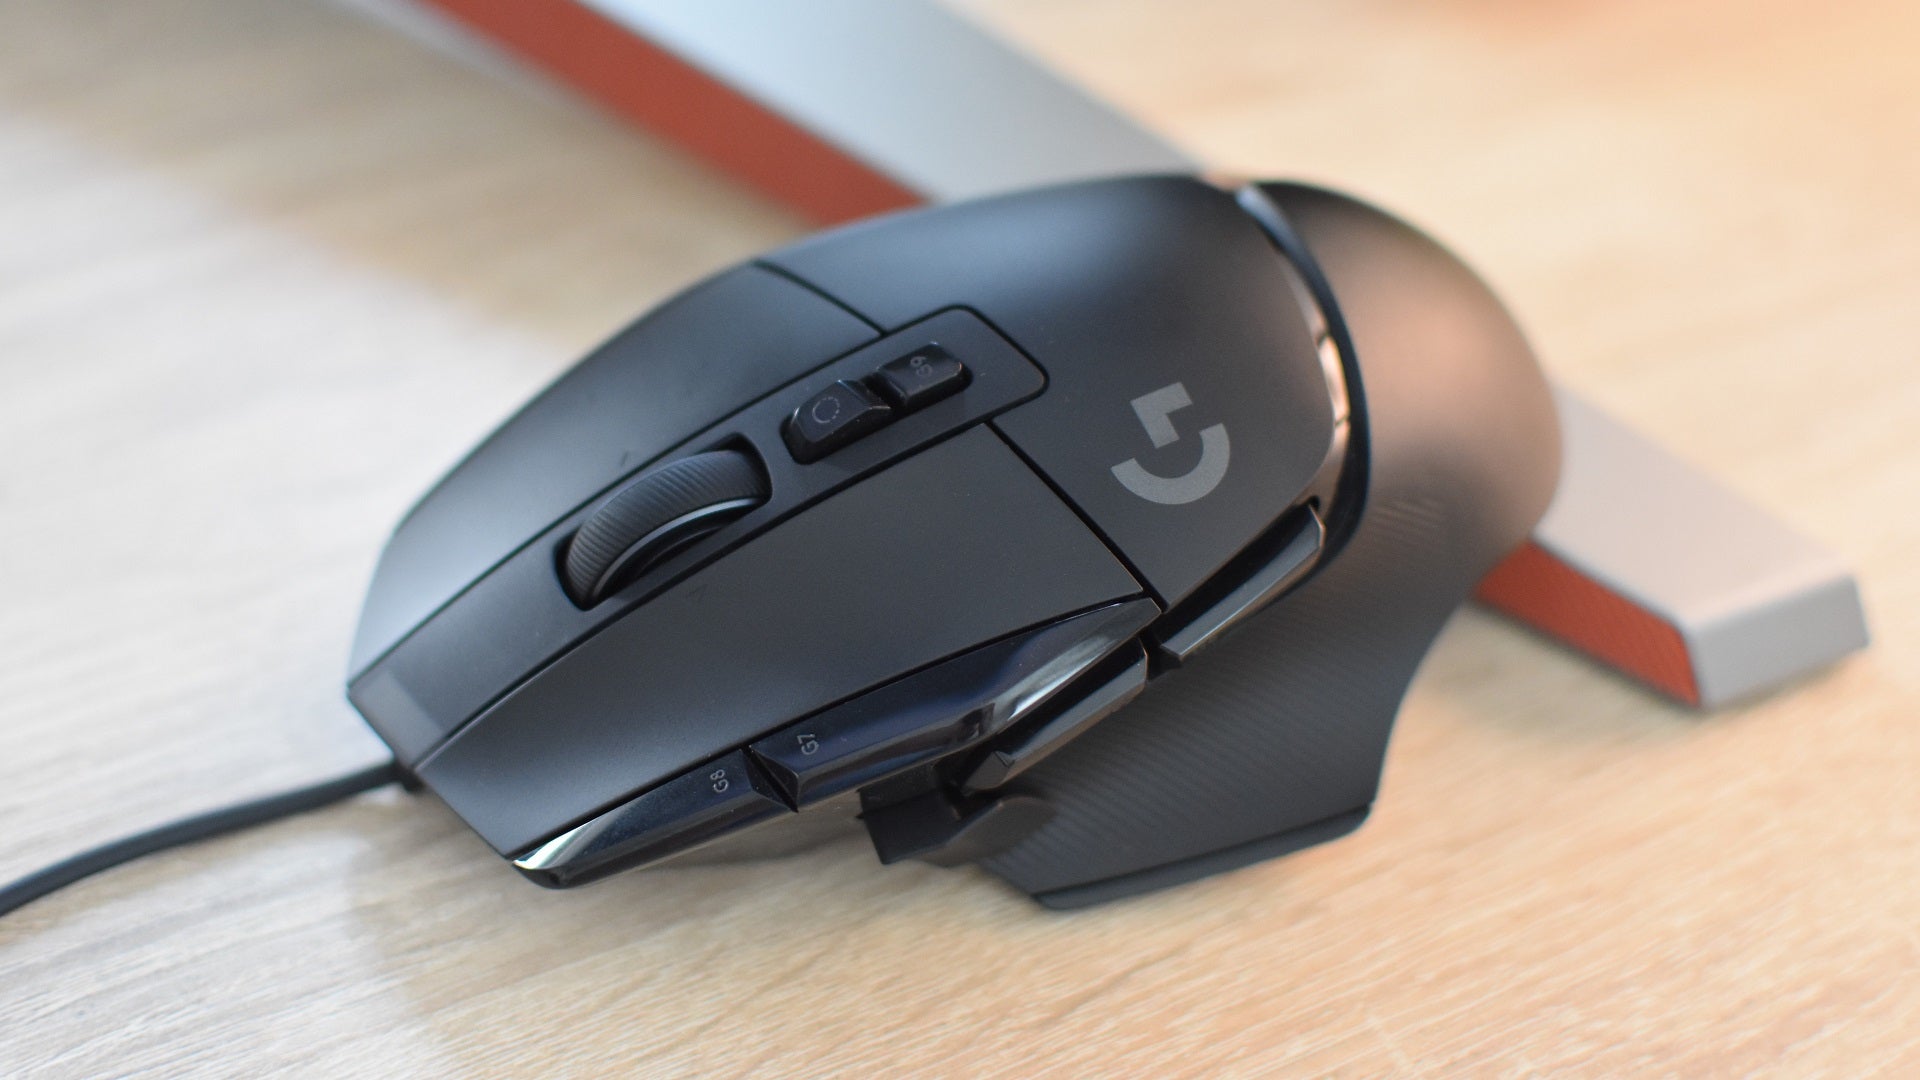 The Logitech G502 X gaming mouse on a desk.